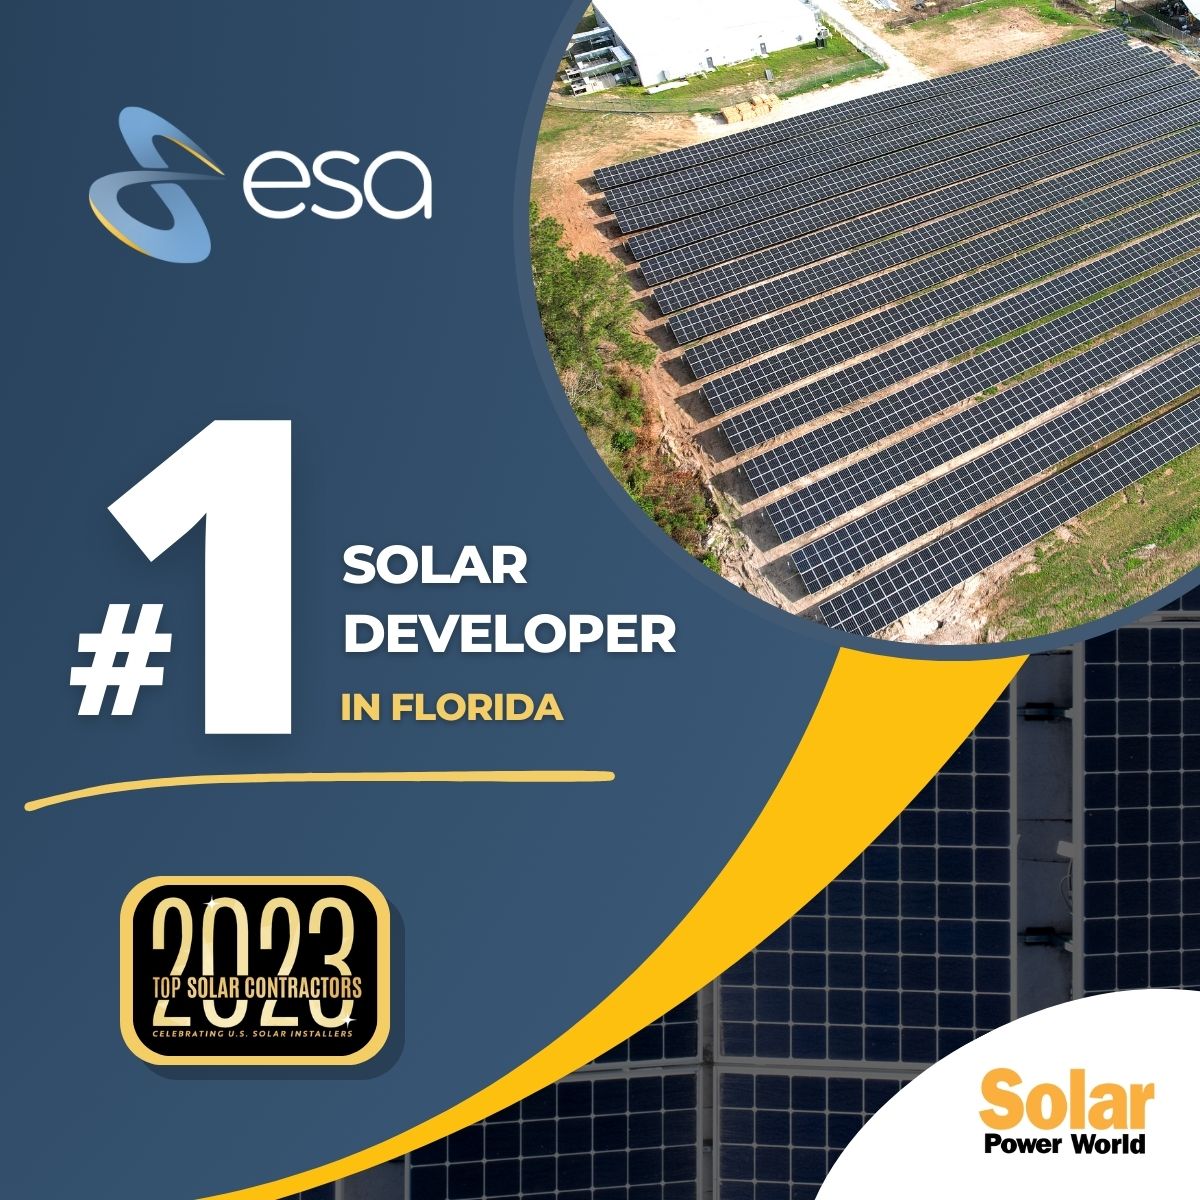 ESA RECOGNIZED AS THE #1 SOLAR DEVELOPER IN FLORIDA BY SOLAR POWER WORLD